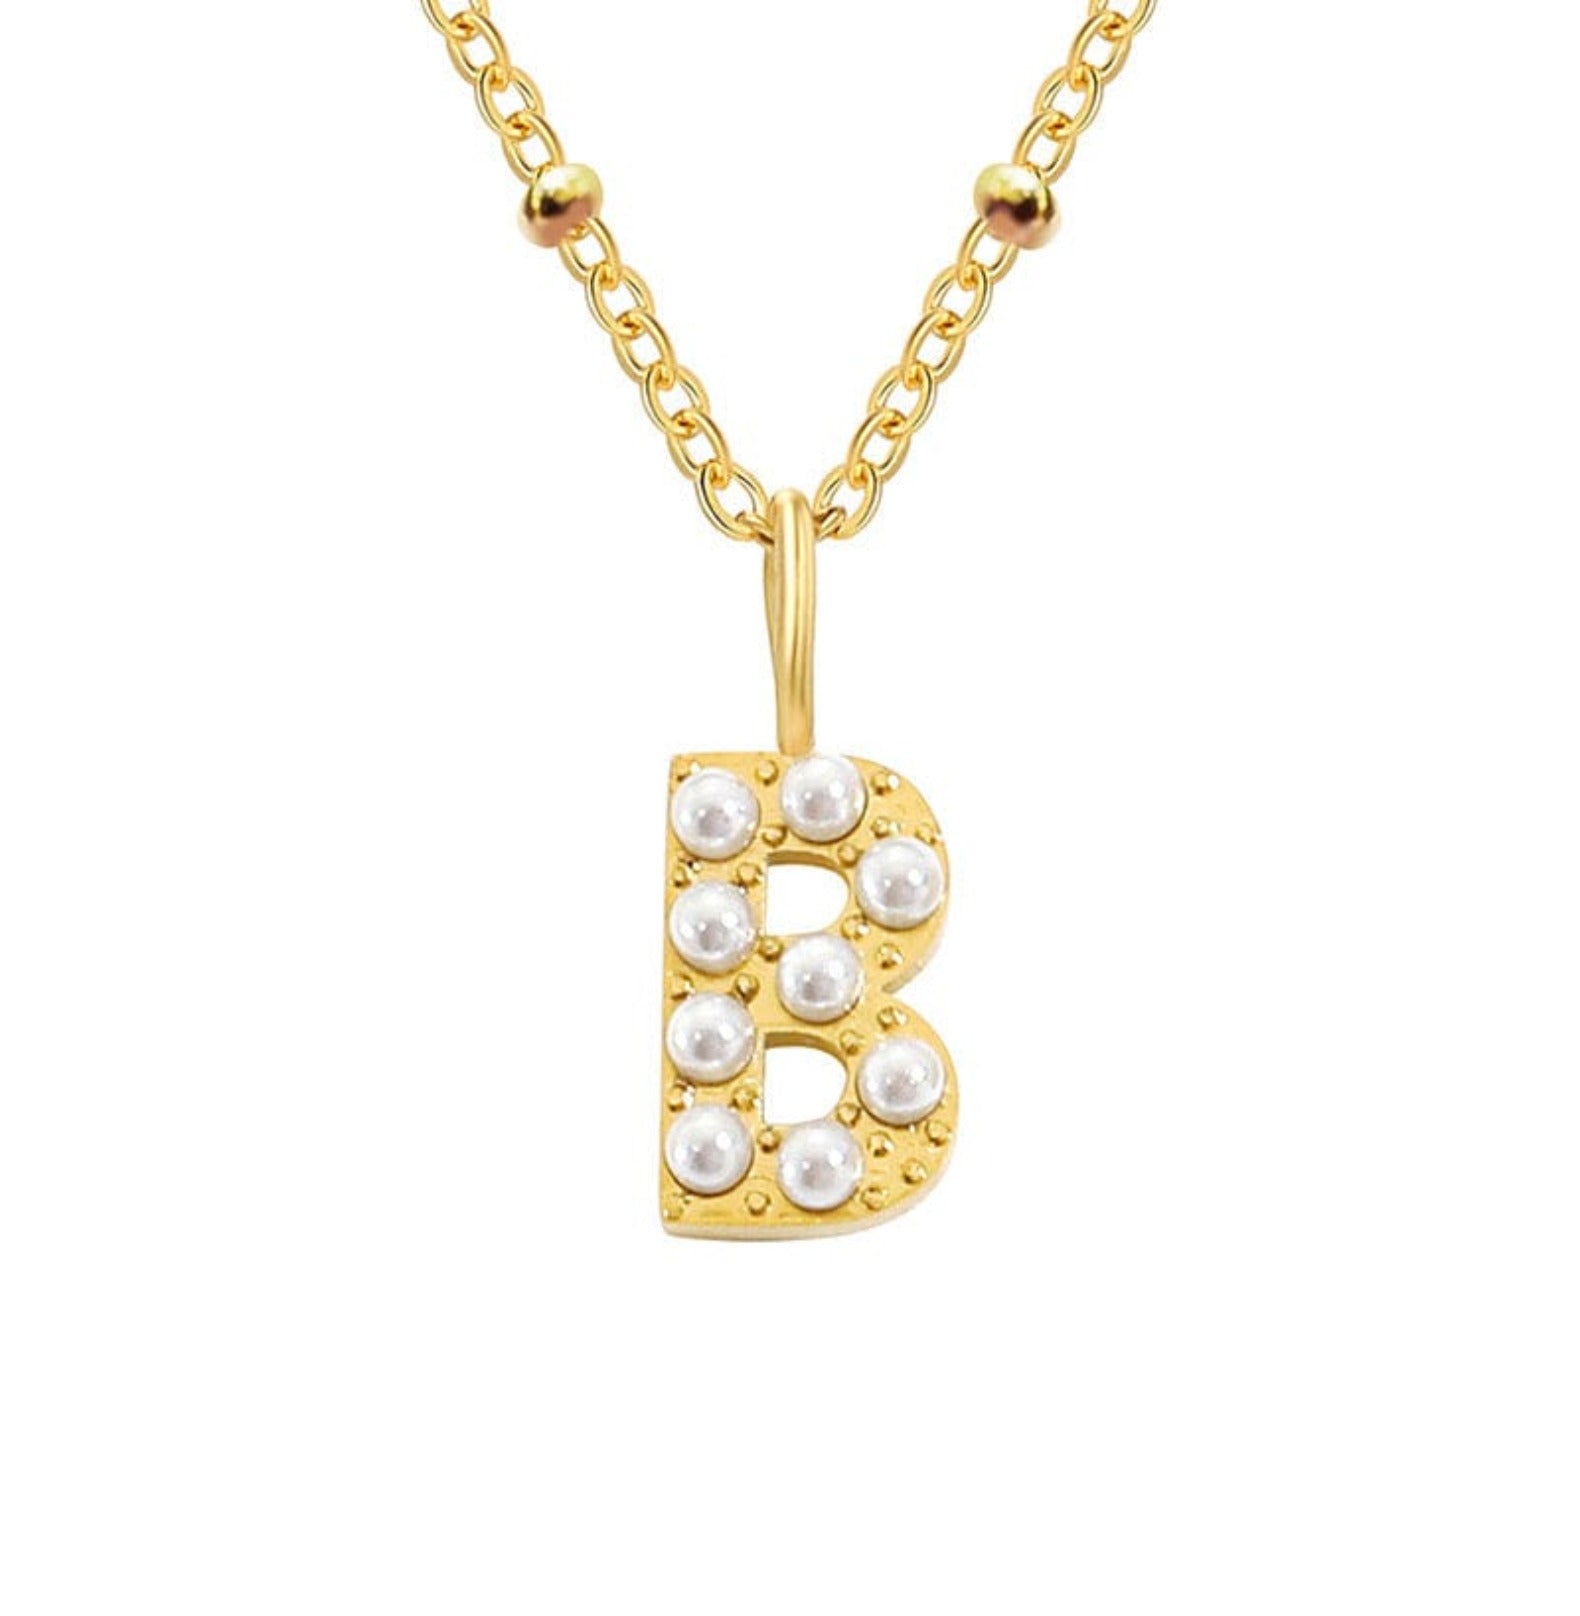 PERSONALISED PEARL INITIAL NECKLACE neck Yubama Jewelry Online Store - The Elegant Designs of Gold and Silver ! B Gold 